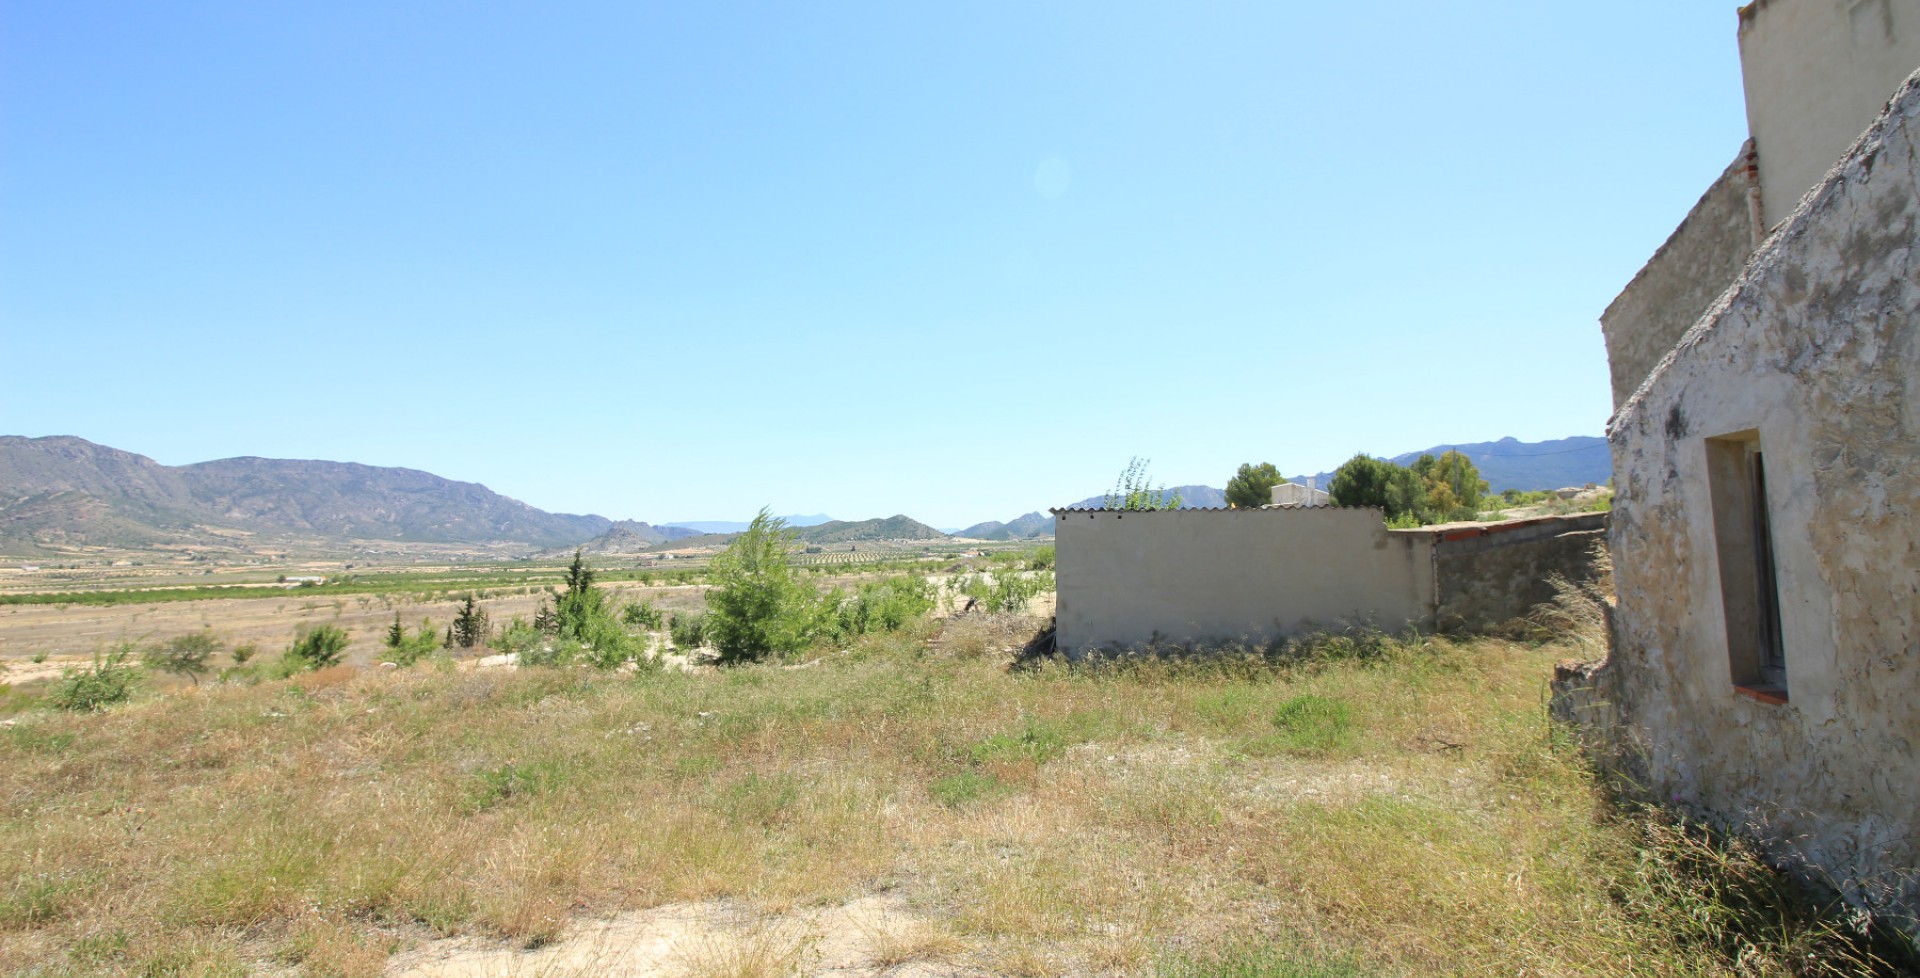 Luxury rustic country house with great views, Ricote, Murcia, Spain